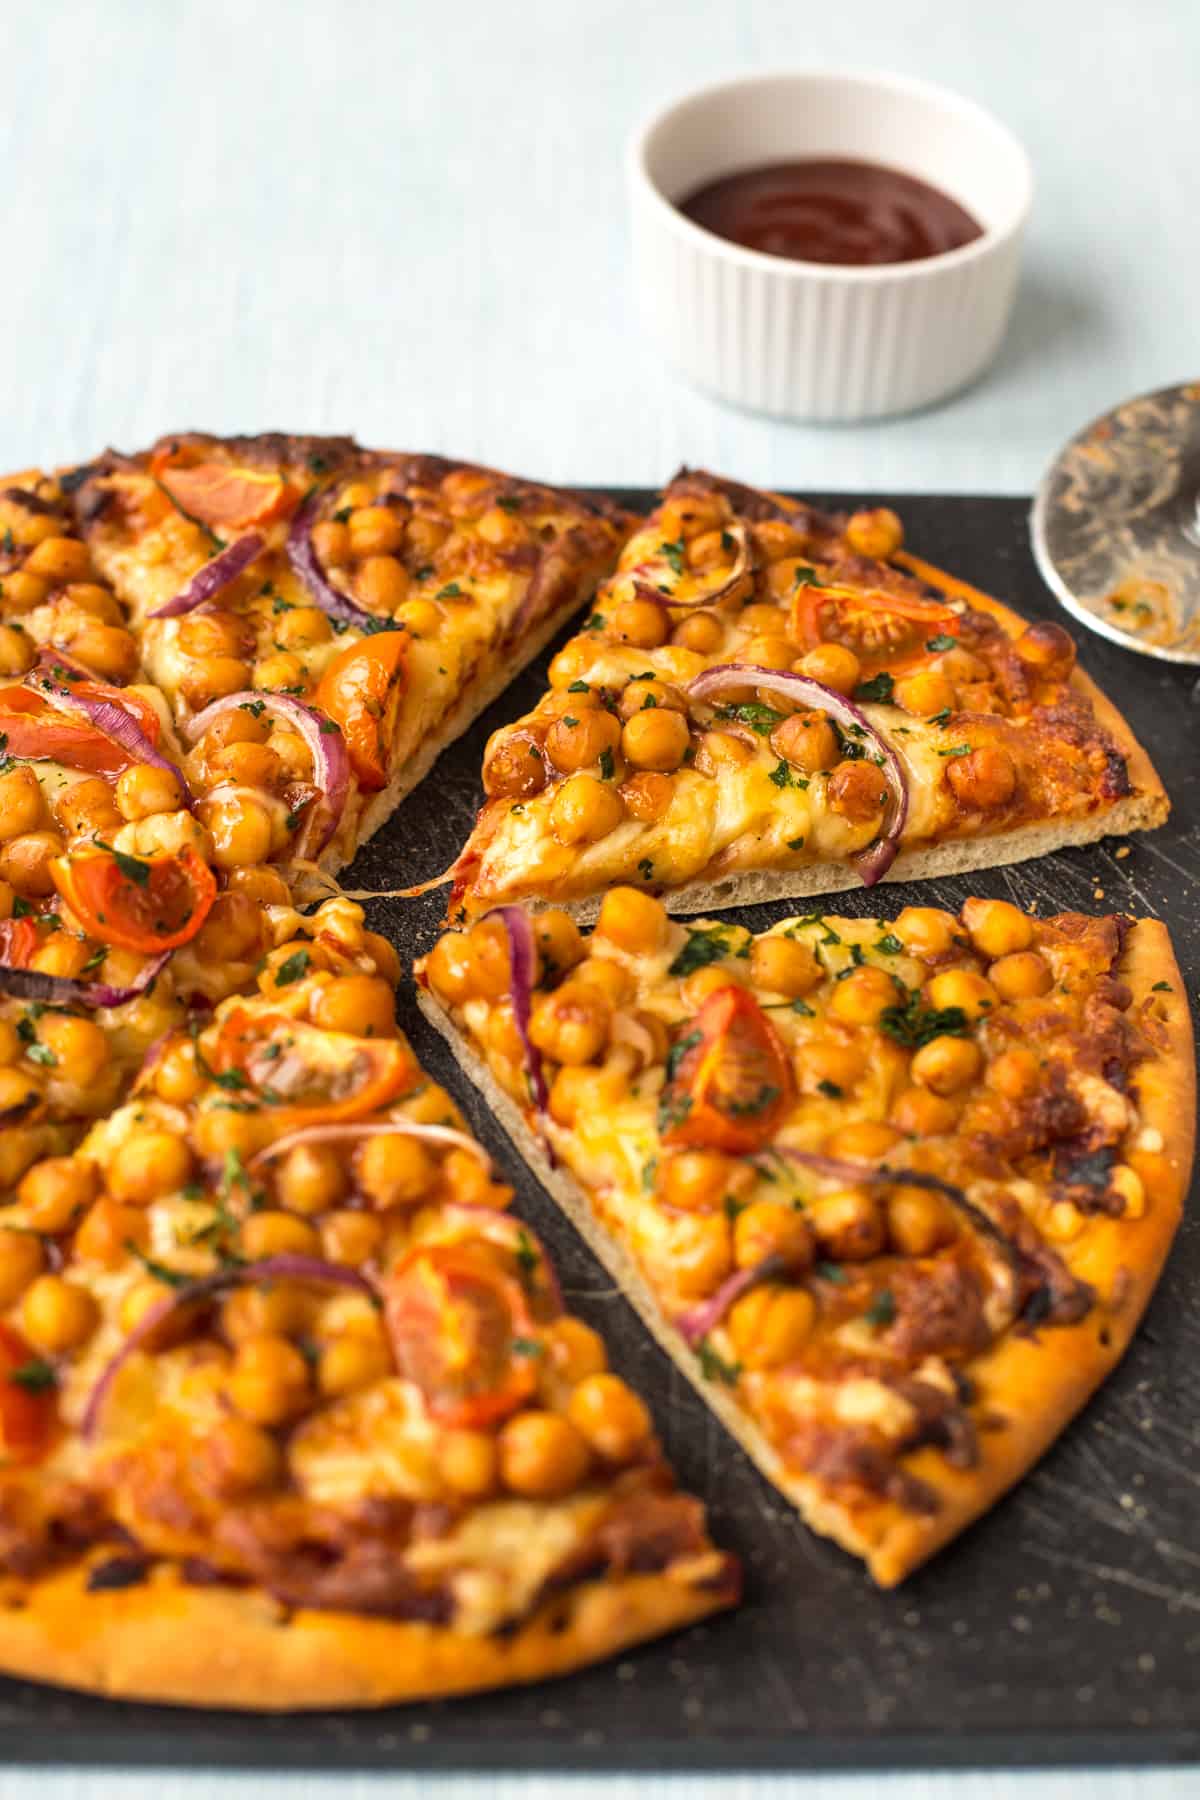 A BBQ chickpea pizza cut into slices on a board.